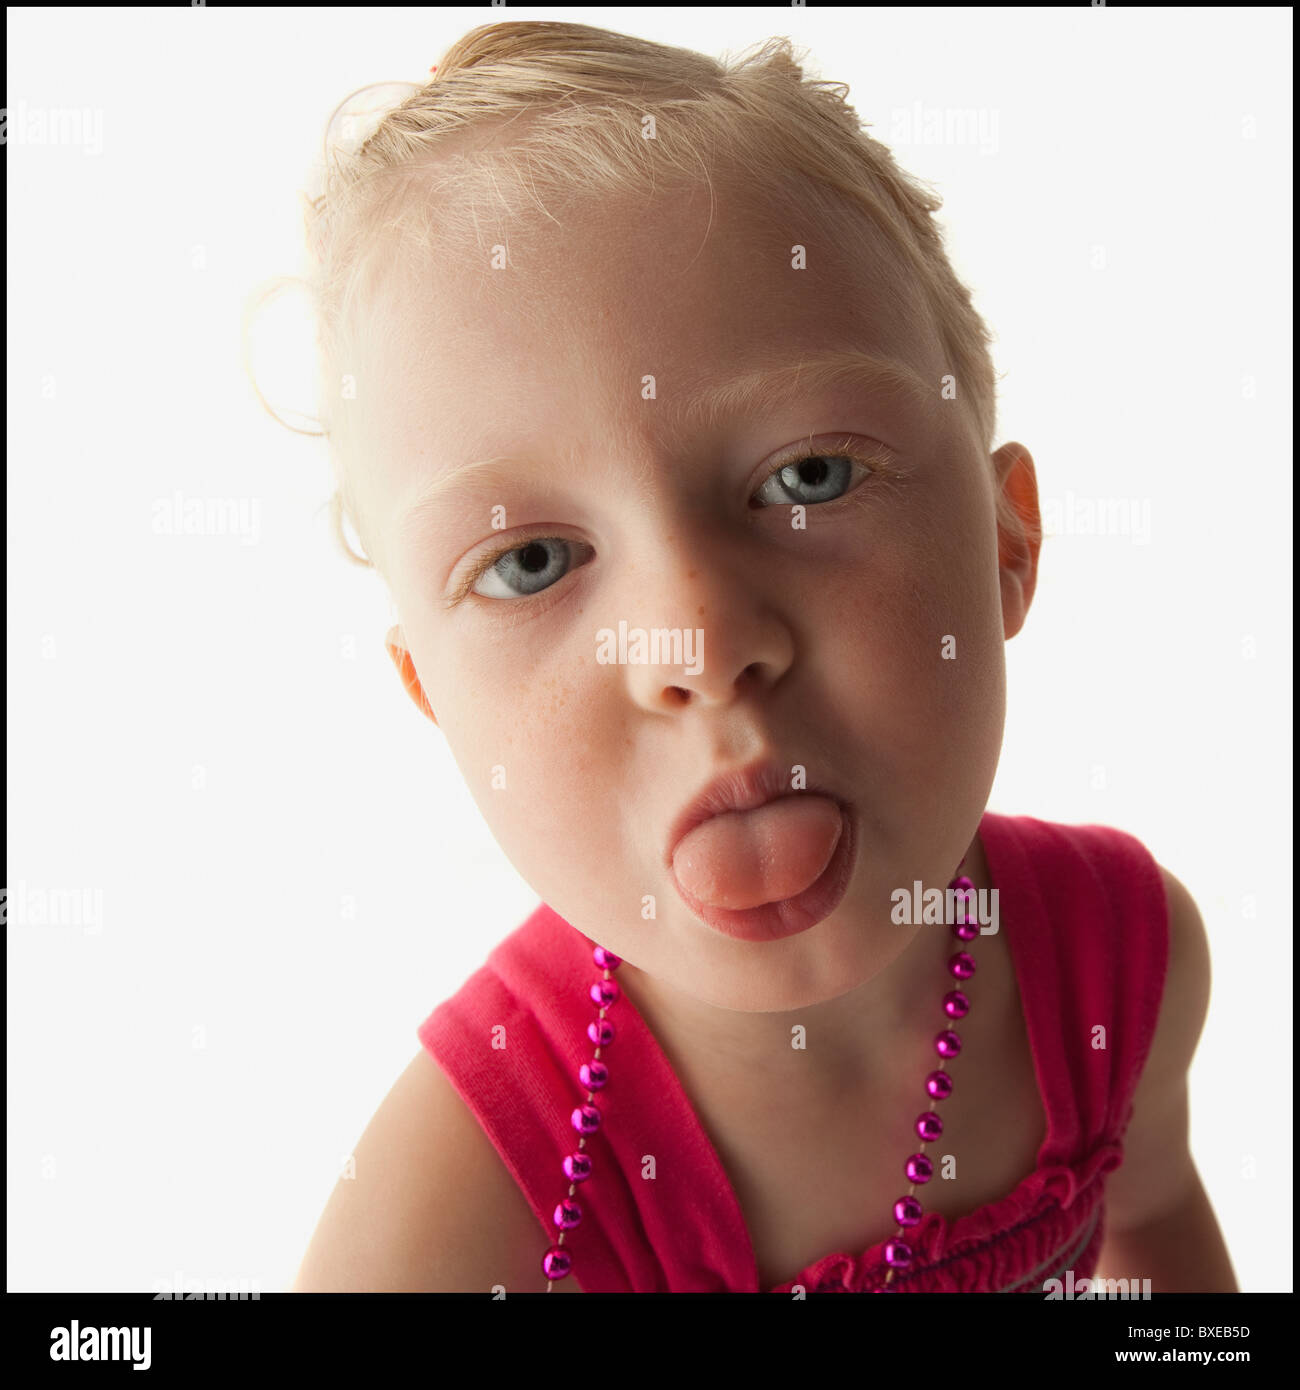 Toddler sticking her tongue out Stock Photo